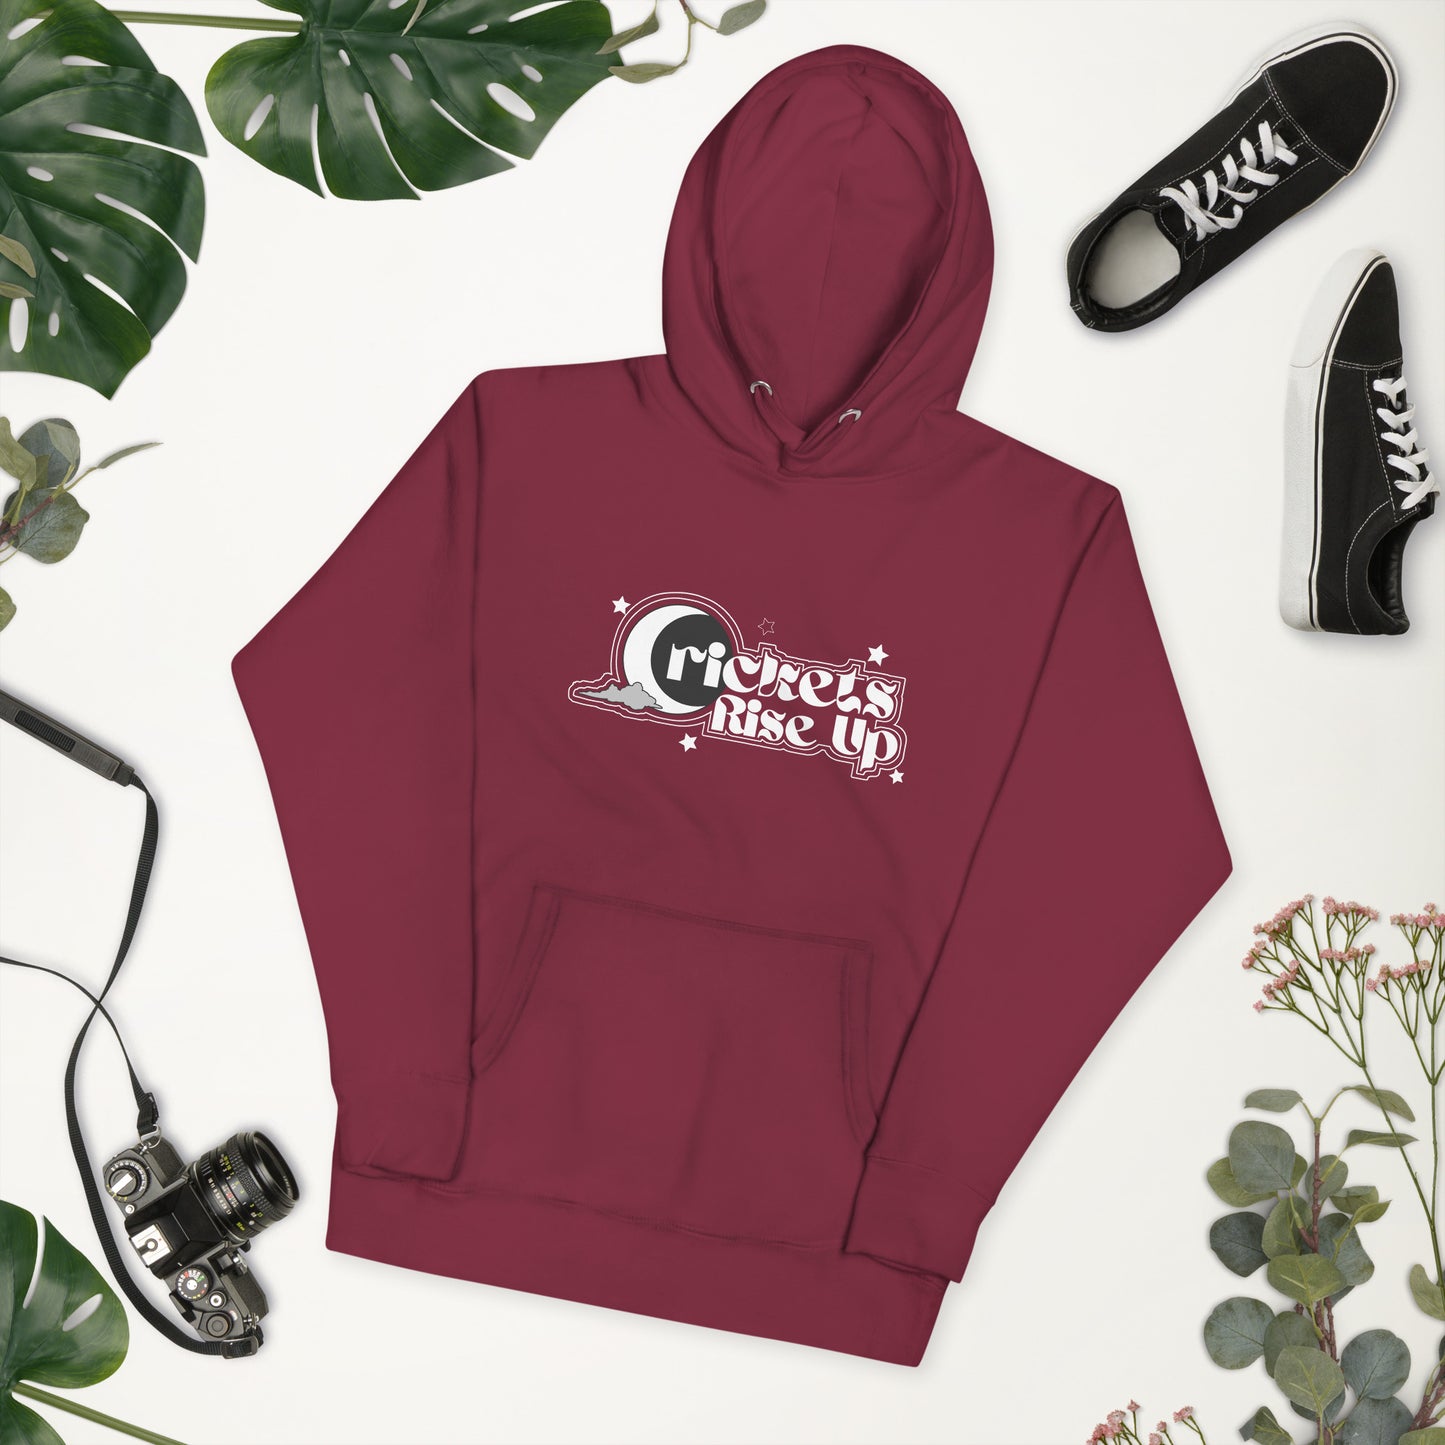 Crickets Rise Up Unisex Hoodie